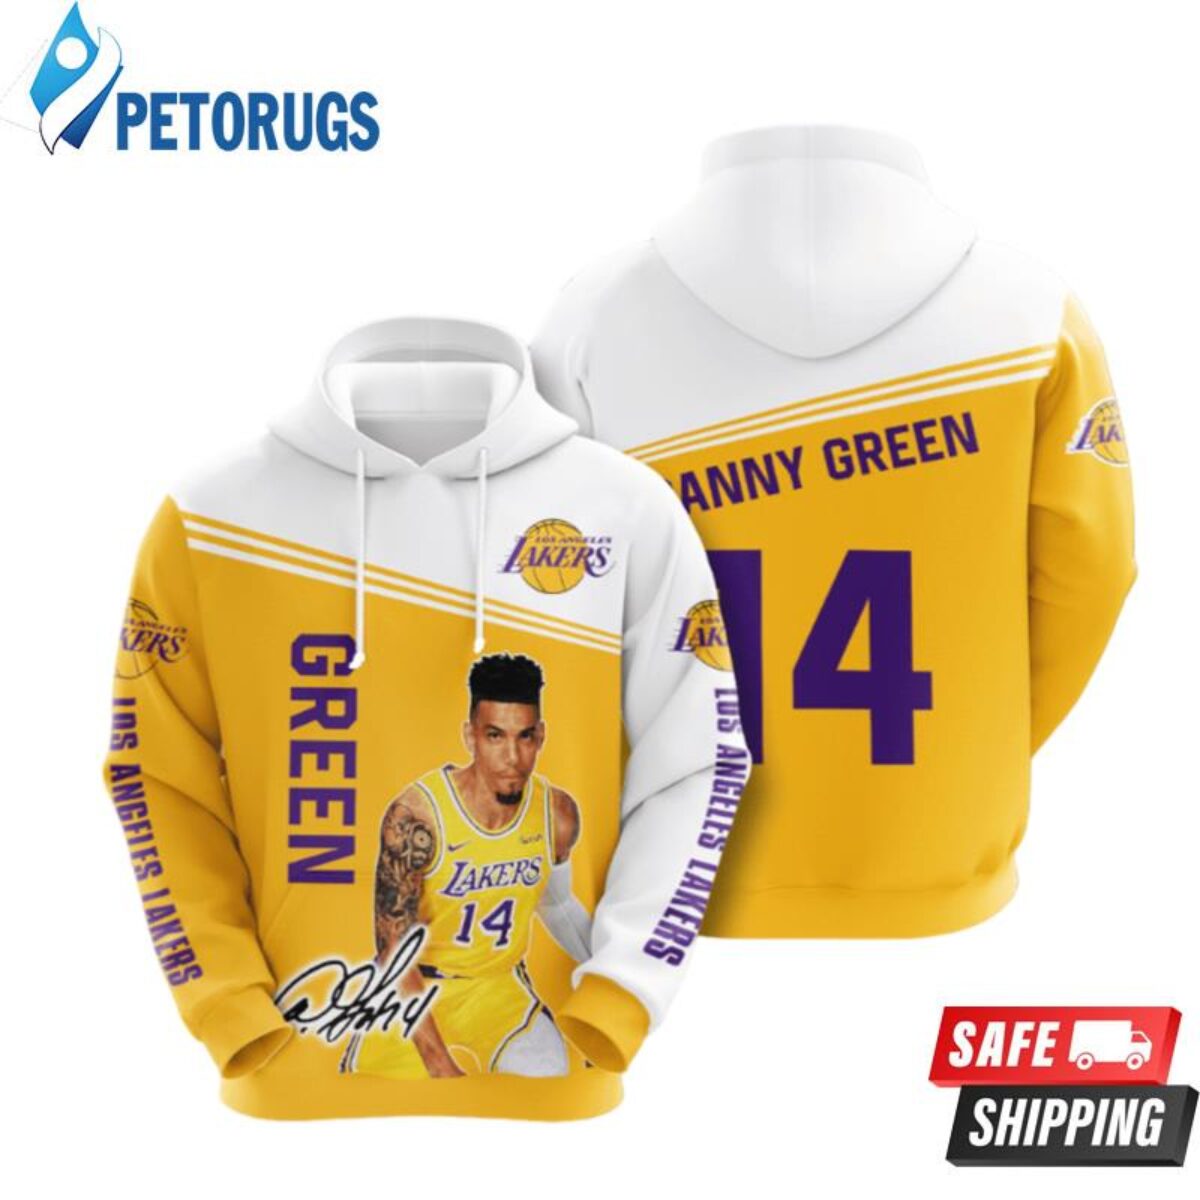 Los Angeles Lakers All Over Print Fleece Sweater 21 / XL